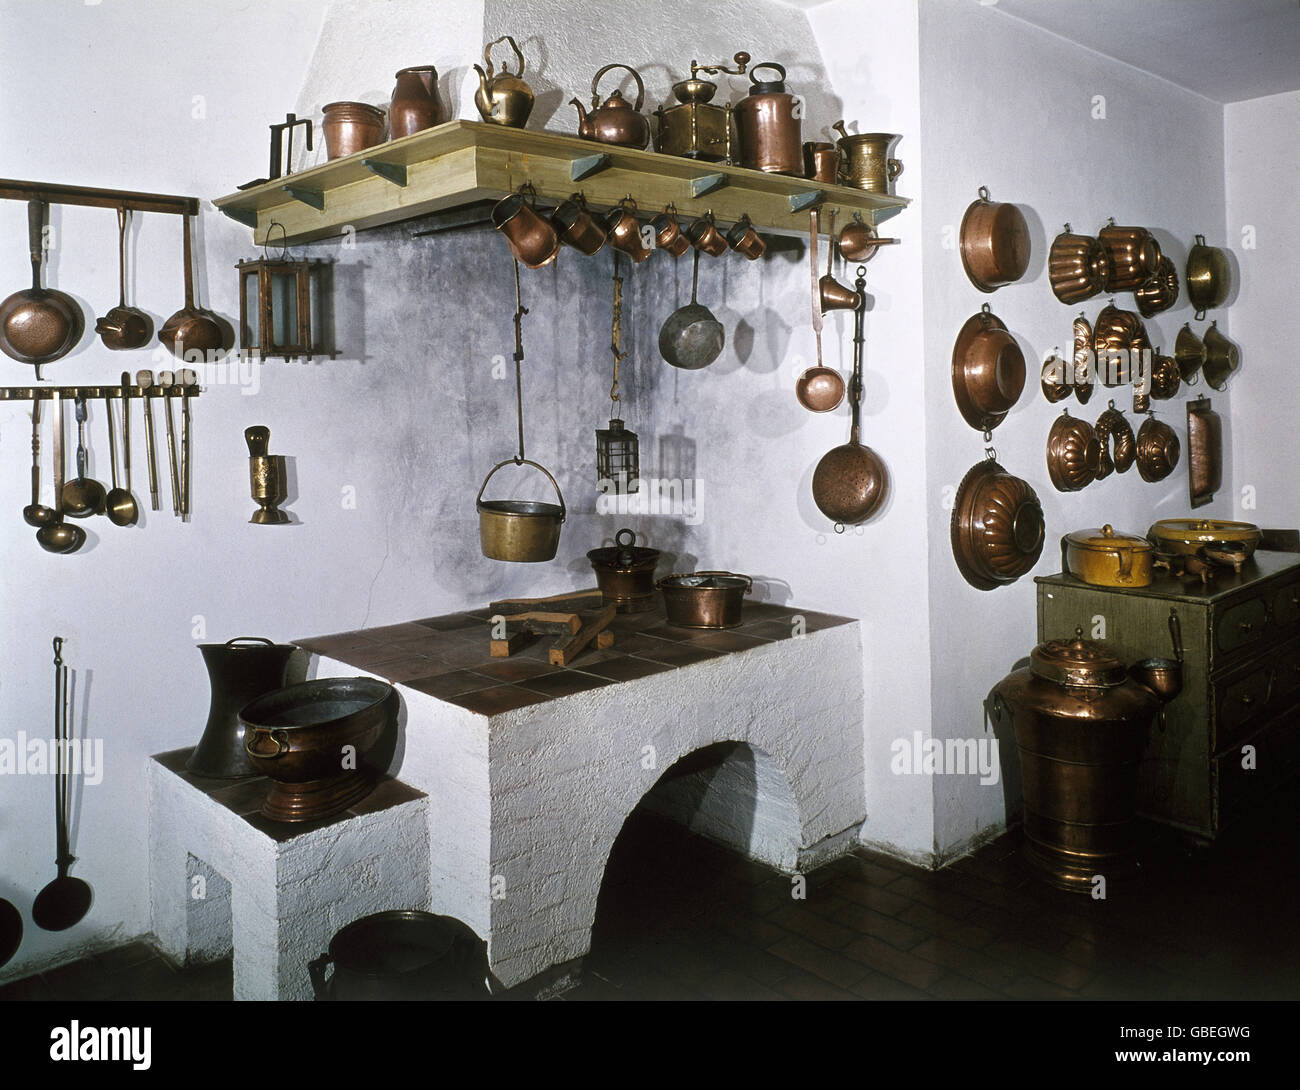 furnishing, kitchen, reconstruction of a kitchen fron the 19th century, municipal museum, Munich, 19th century, historic, historical, accommodation, living, kitchen, cooking, baking, stove, pot, pots, cooking pot, cooking pots, baking dish, baking pan, baking dishes, baking pans, vessel, vessels, kitchen equipment, copper, furnishings, interior furnishings, Additional-Rights-Clearences-Not Available Stock Photo